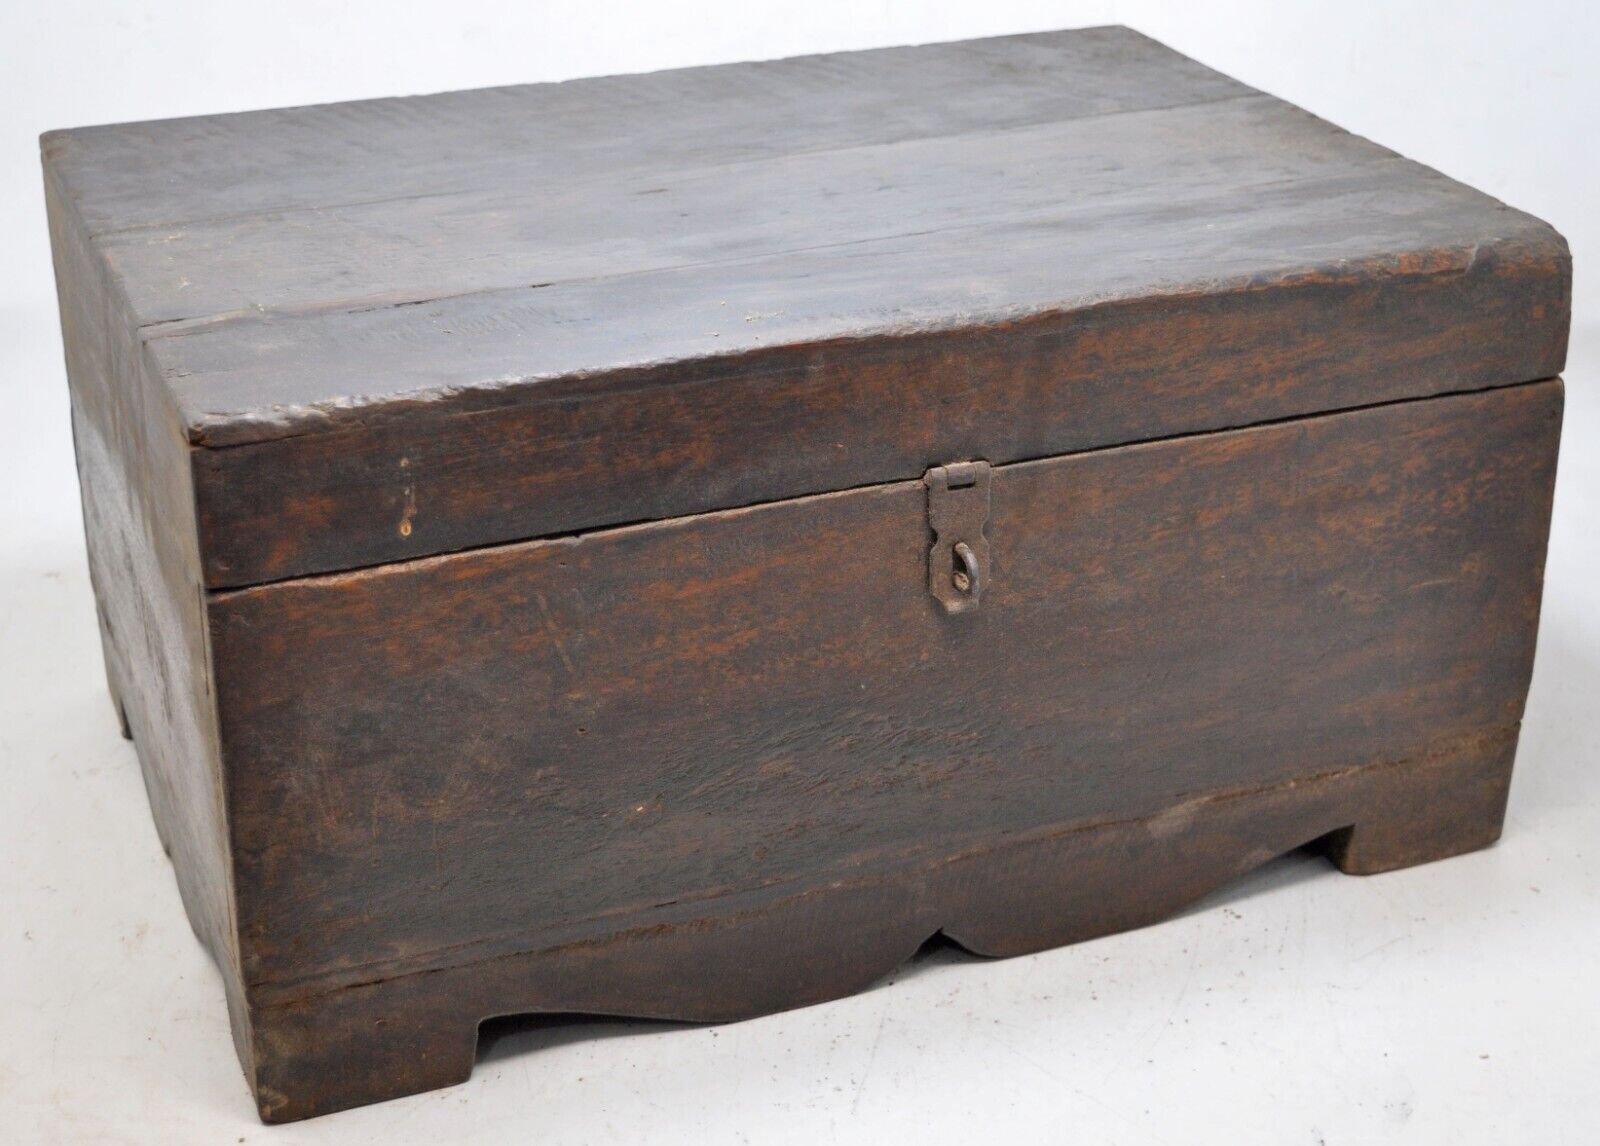 Antique Wooden Large Merchants Cash Chest Box Original Old Hand Crafted